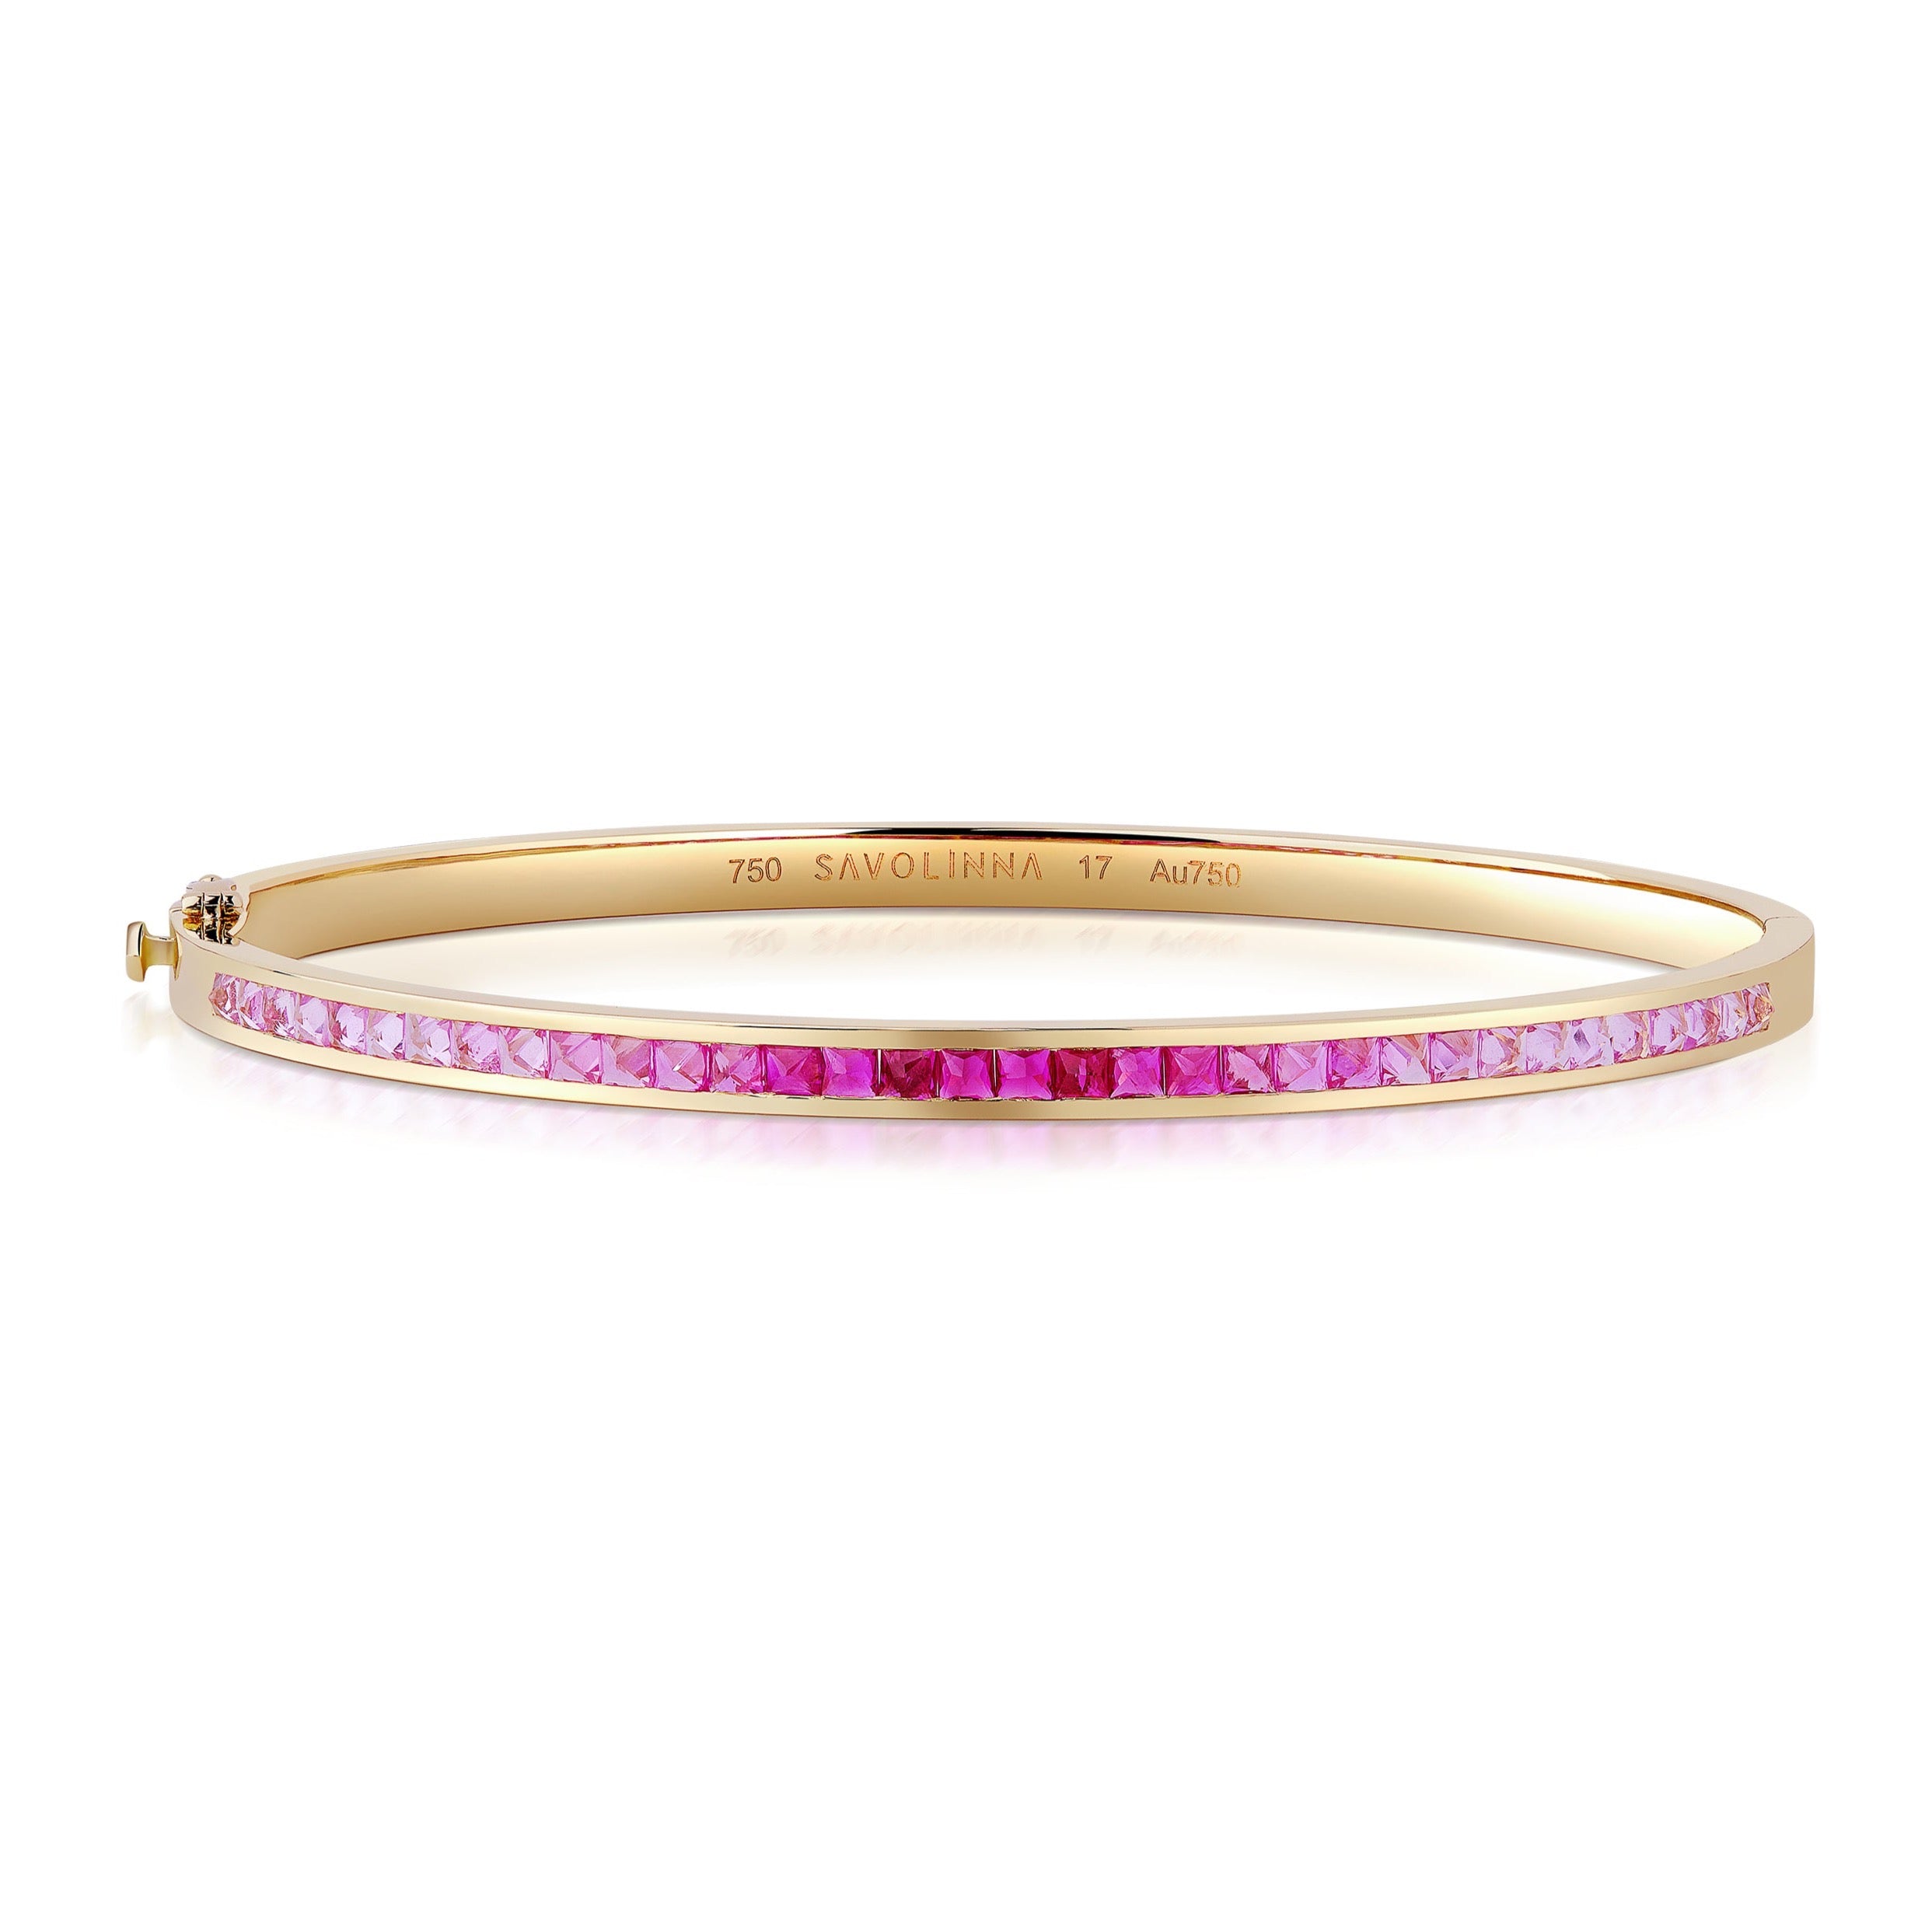 Be-Spiked Bangle, Pink Sapphires